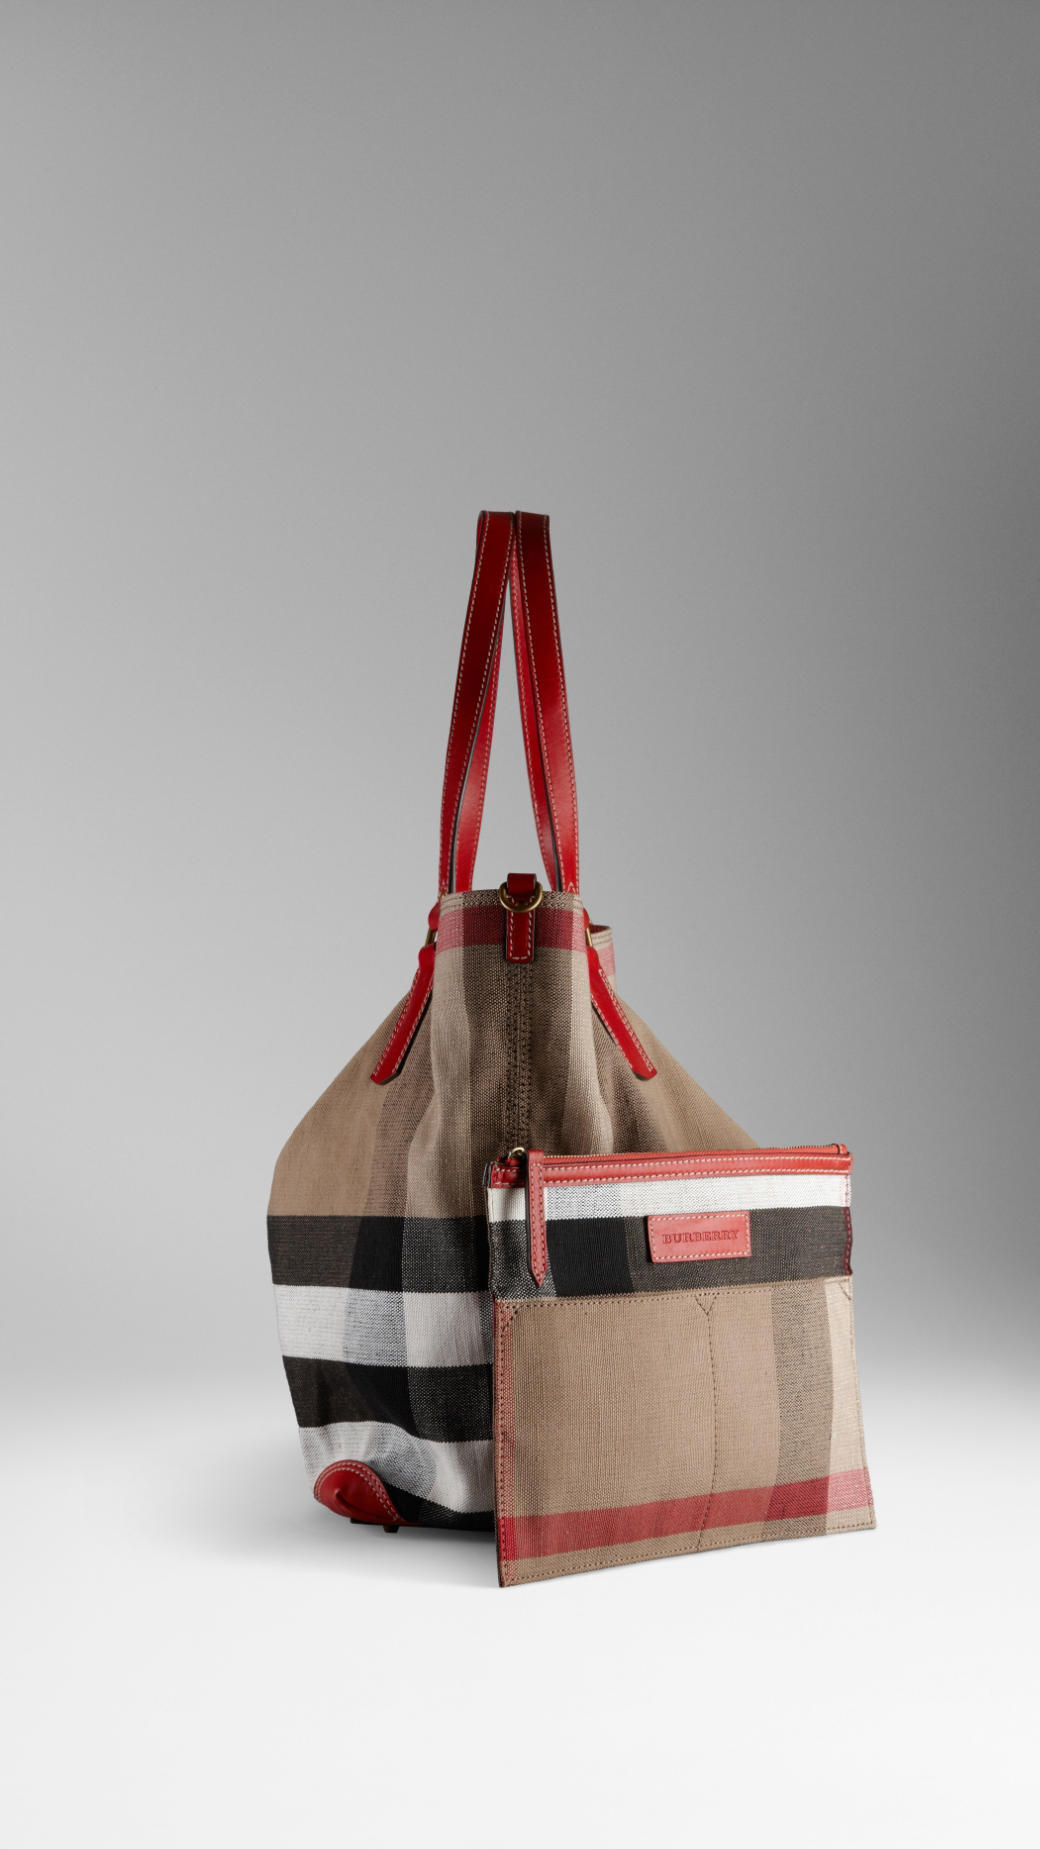 Lyst - Burberry Large Check Canvas Tote Bag